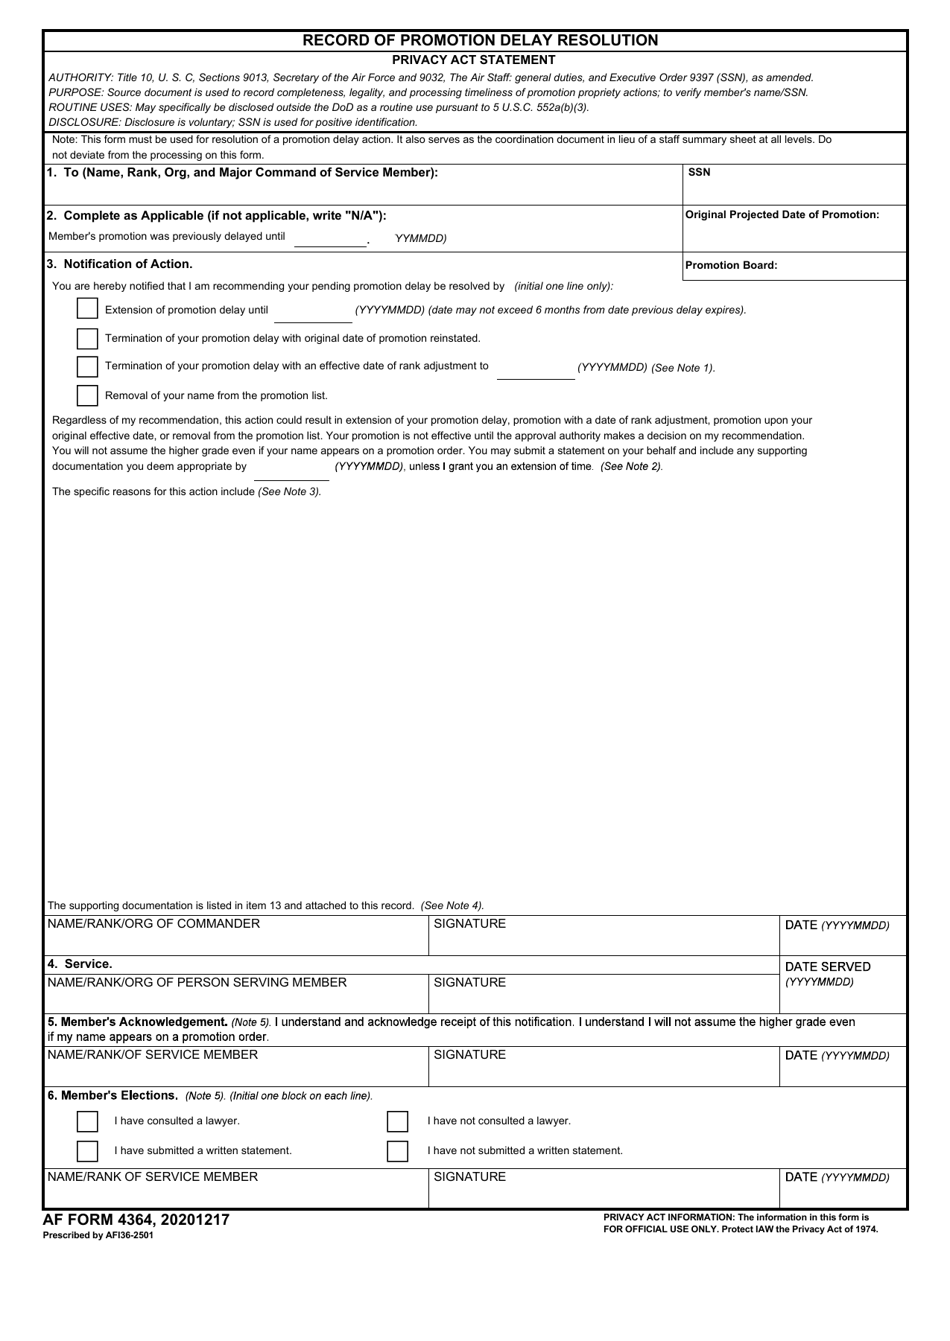 AF Form 4364 Record of Promotion Delay Resolution, Page 1